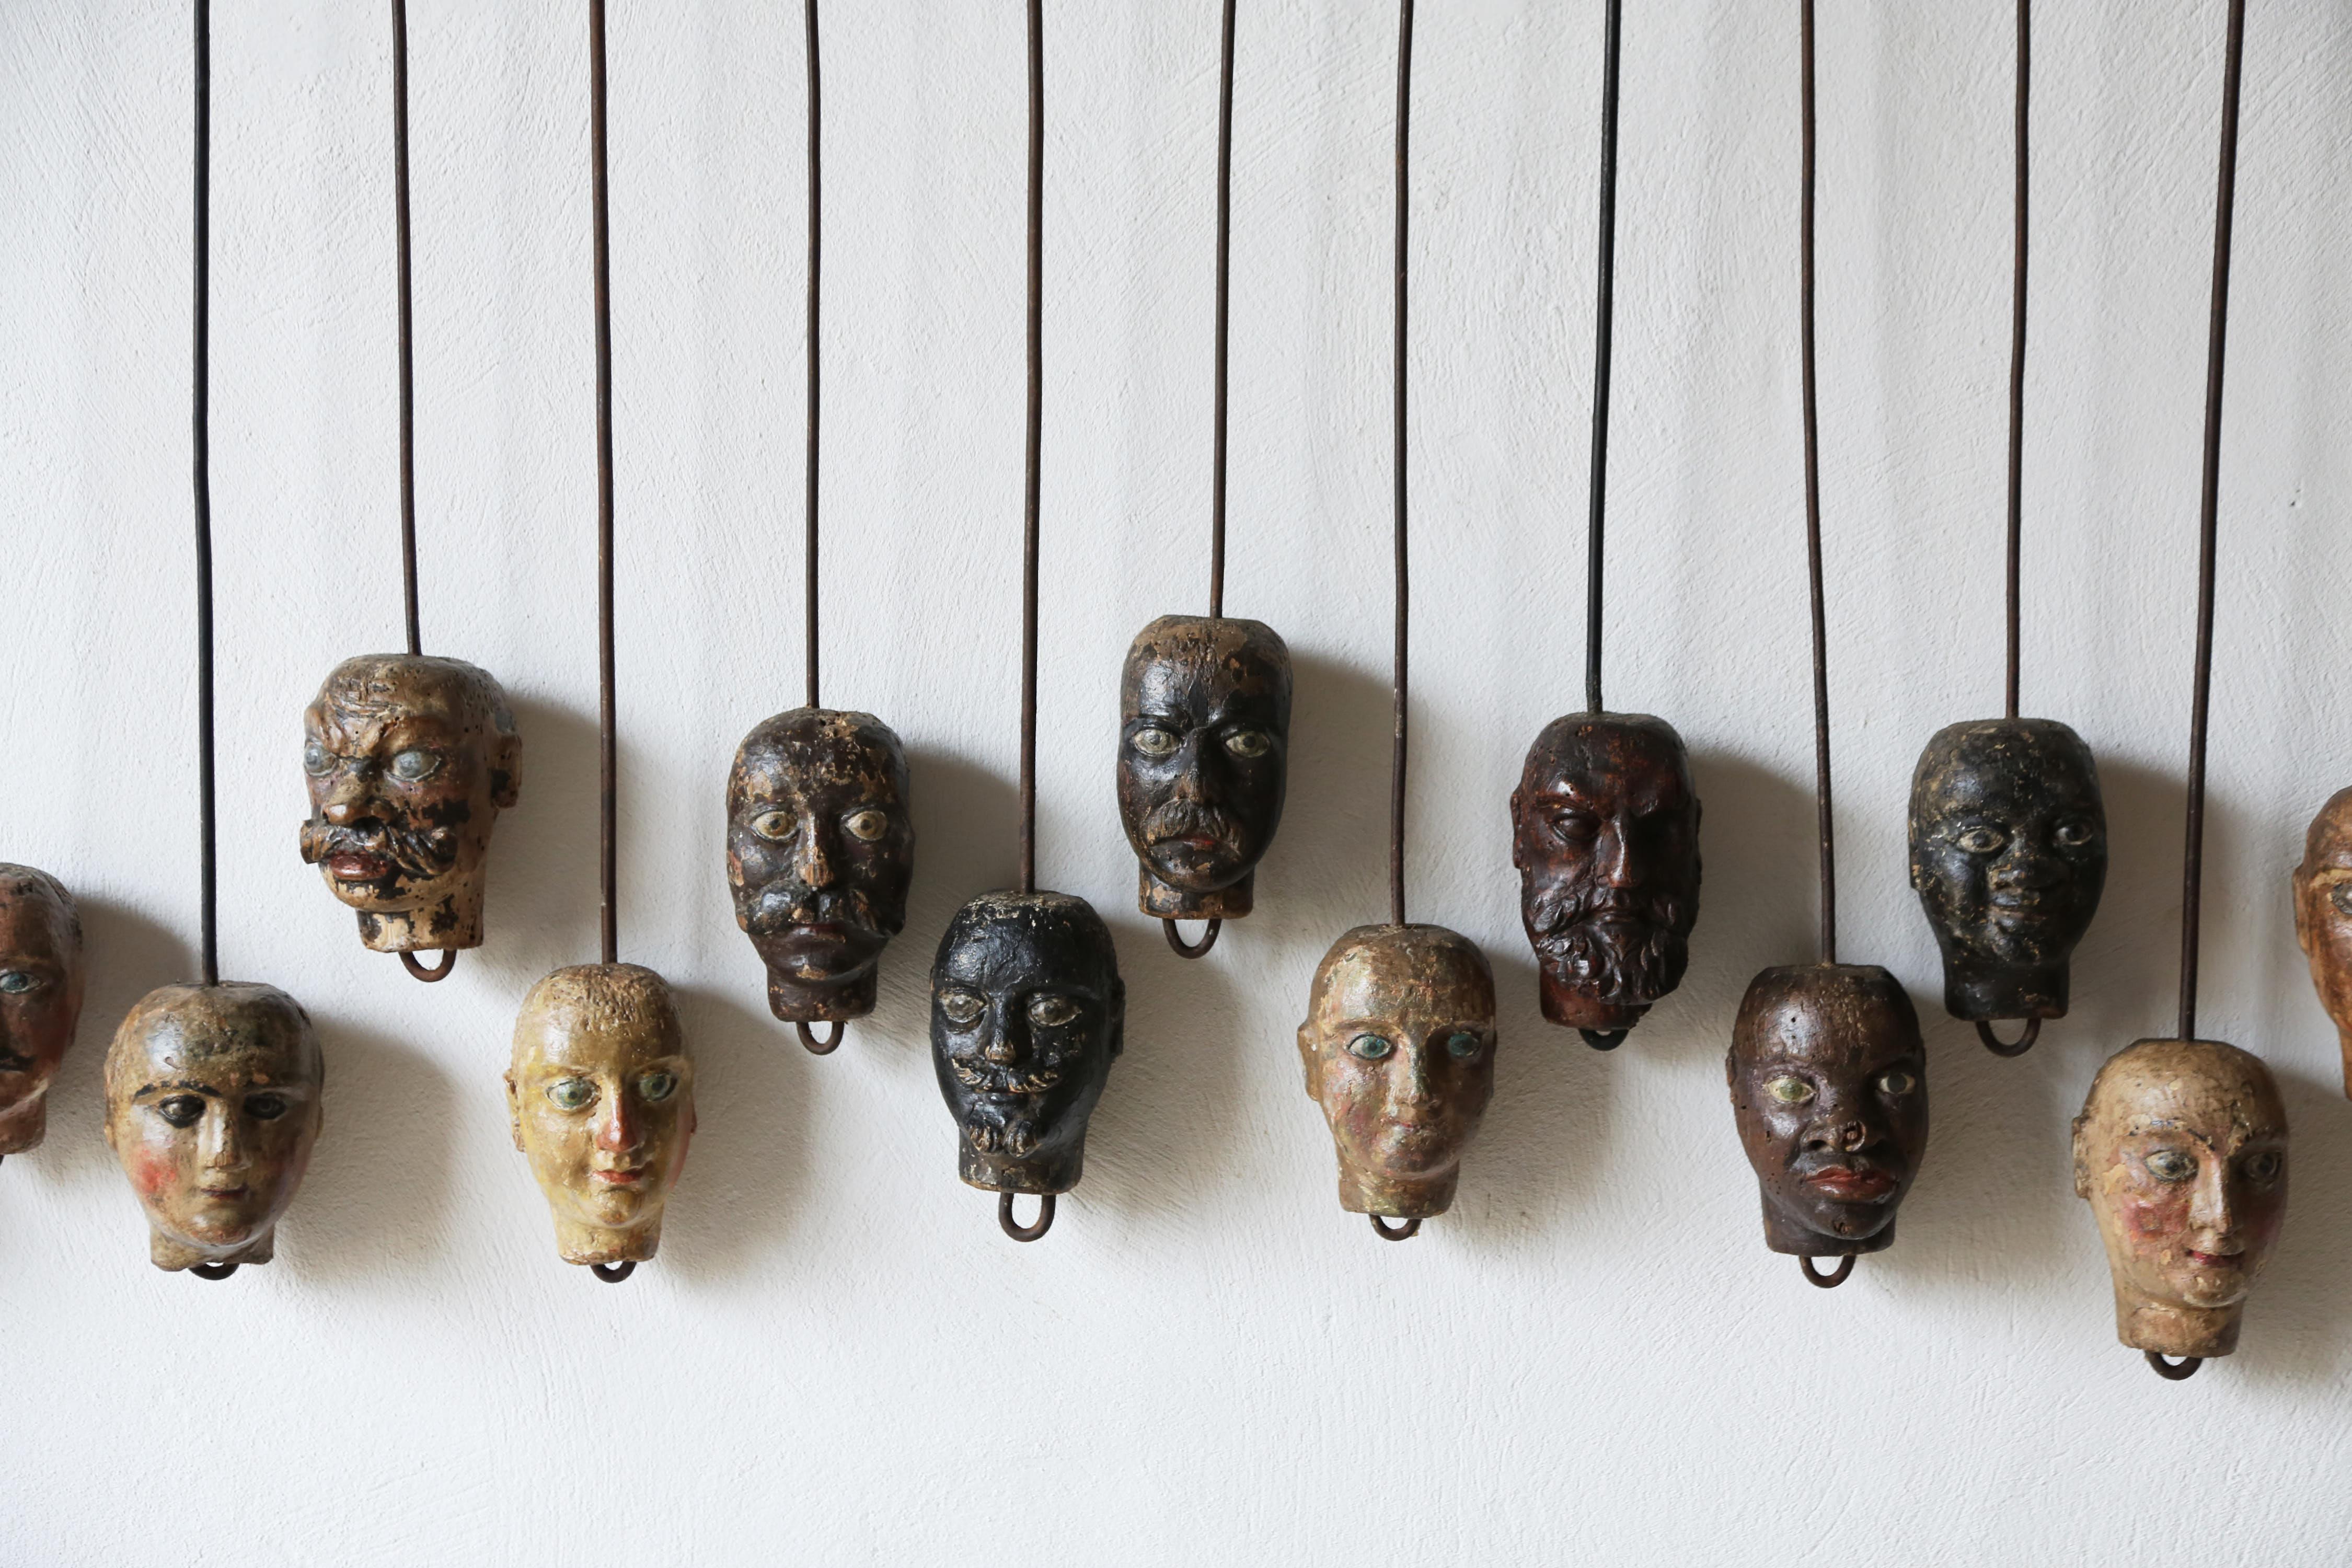 Metal Exceptional Set of 24 Unique Hand-crafted Marionette Heads, Italy, 19th Century For Sale